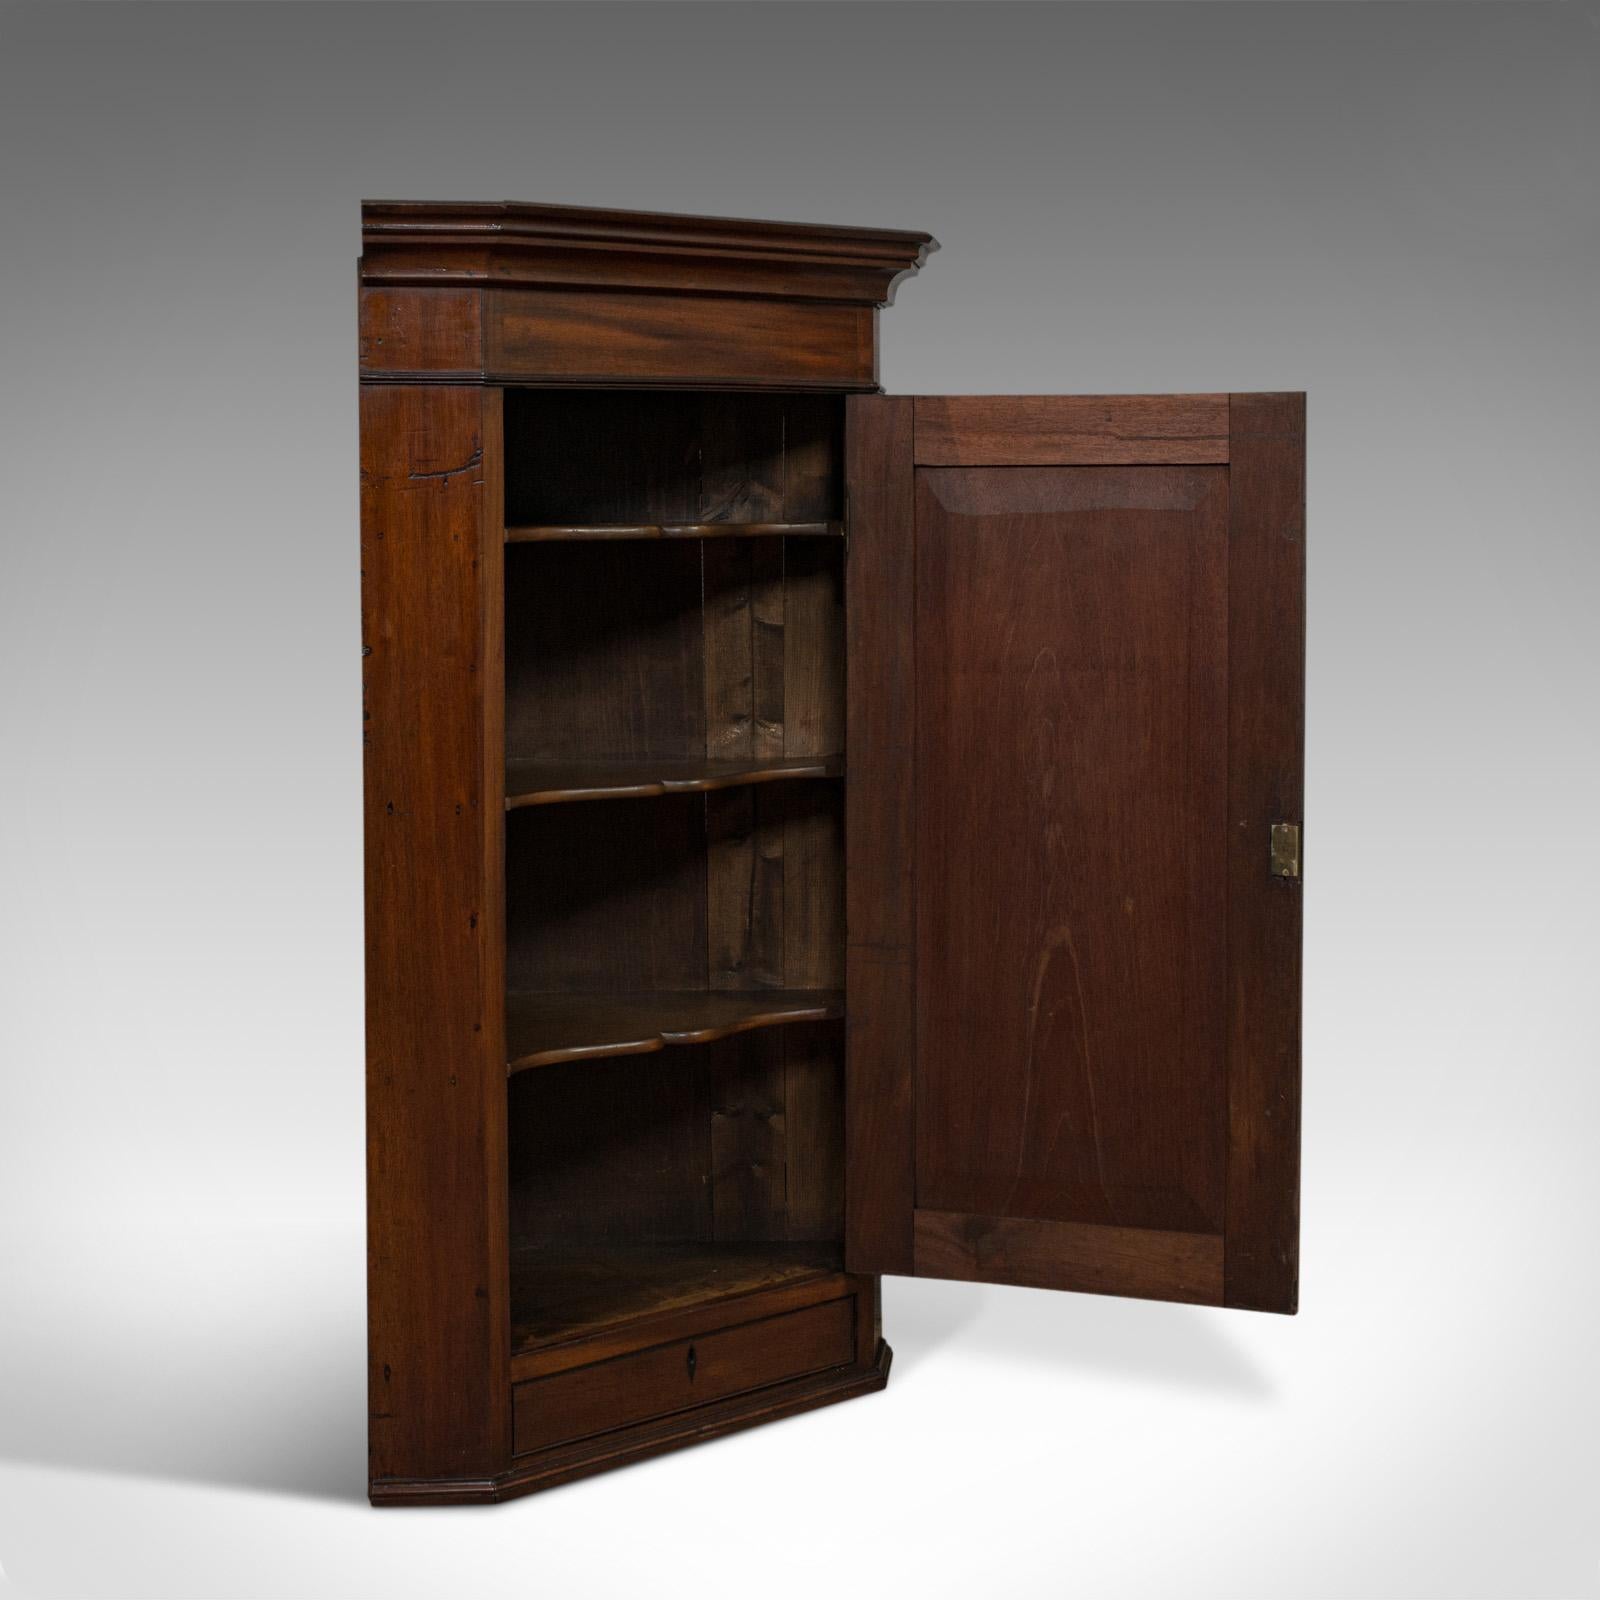 This is an antique corner cabinet. An English, walnut and mahogany, wall-hanging cupboard dating to the Georgian period at the turn of the 19th century, circa 1800.

Classic Georgian form and appeal
Displays a desirable aged patina
Select walnut